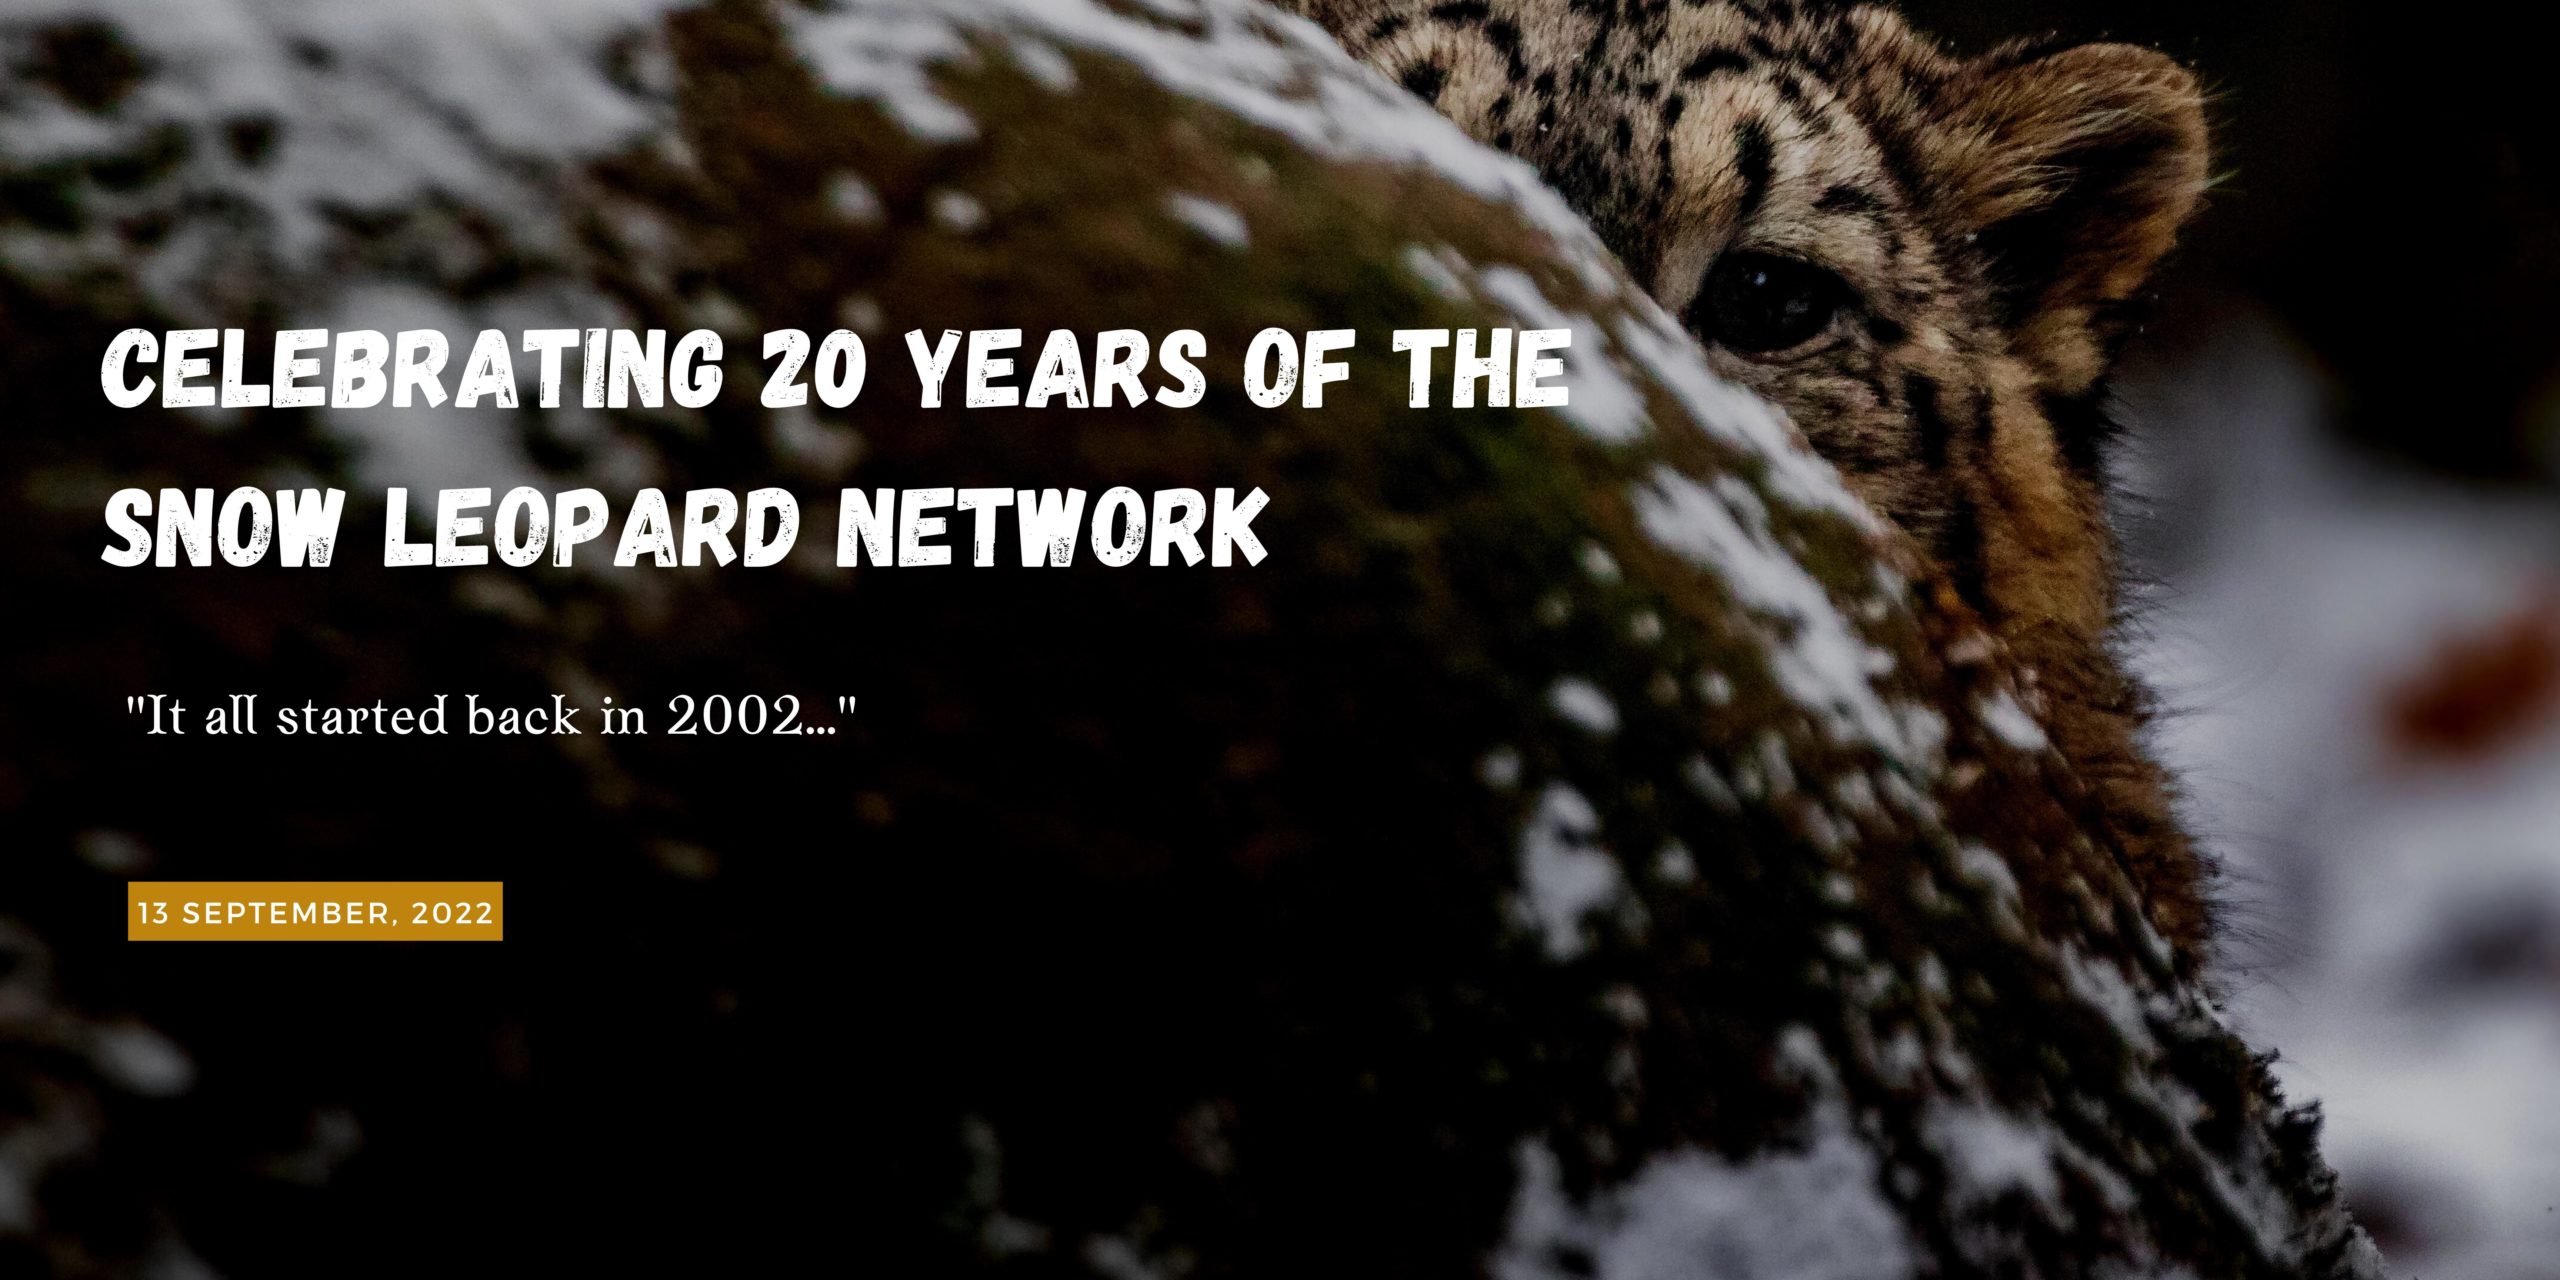 Celebrating 20 years of the Snow Leopard Network